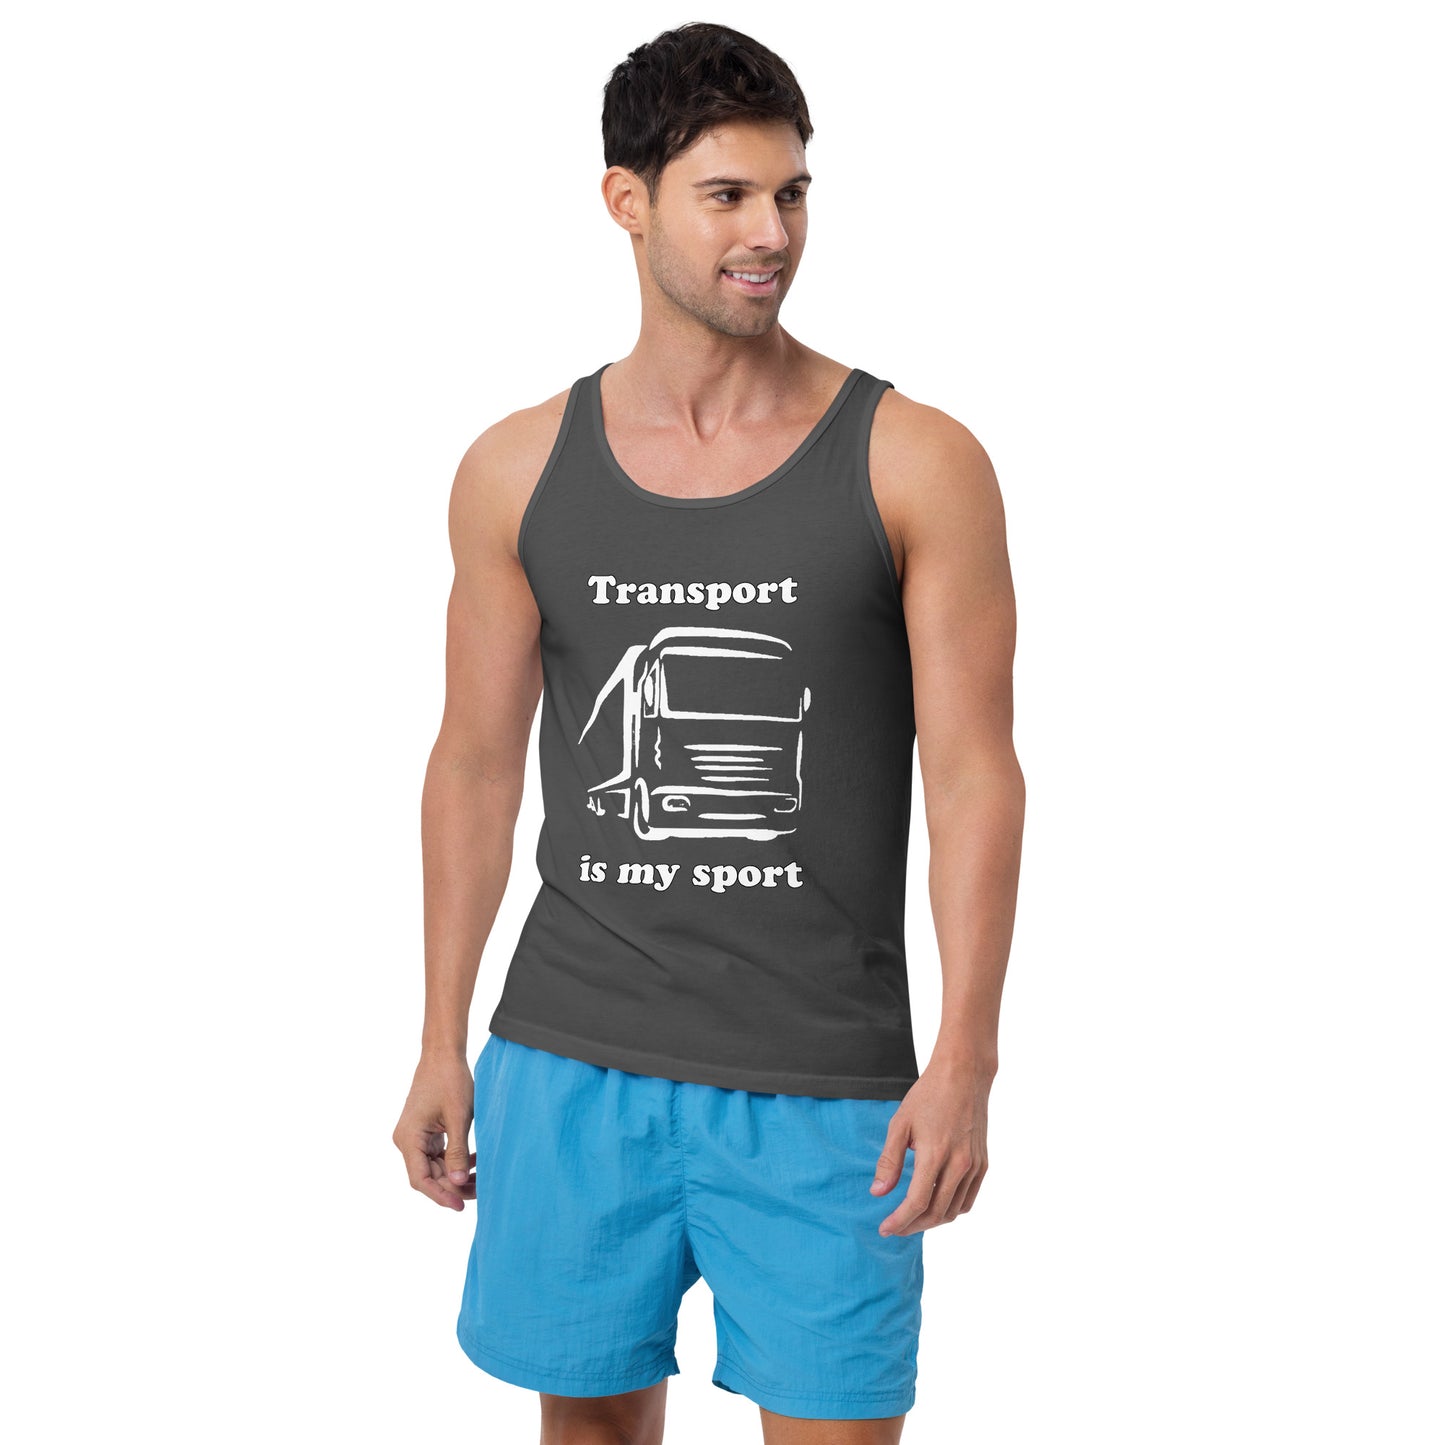 Man with grey tank top with picture of truck and text "Transport is my sport"